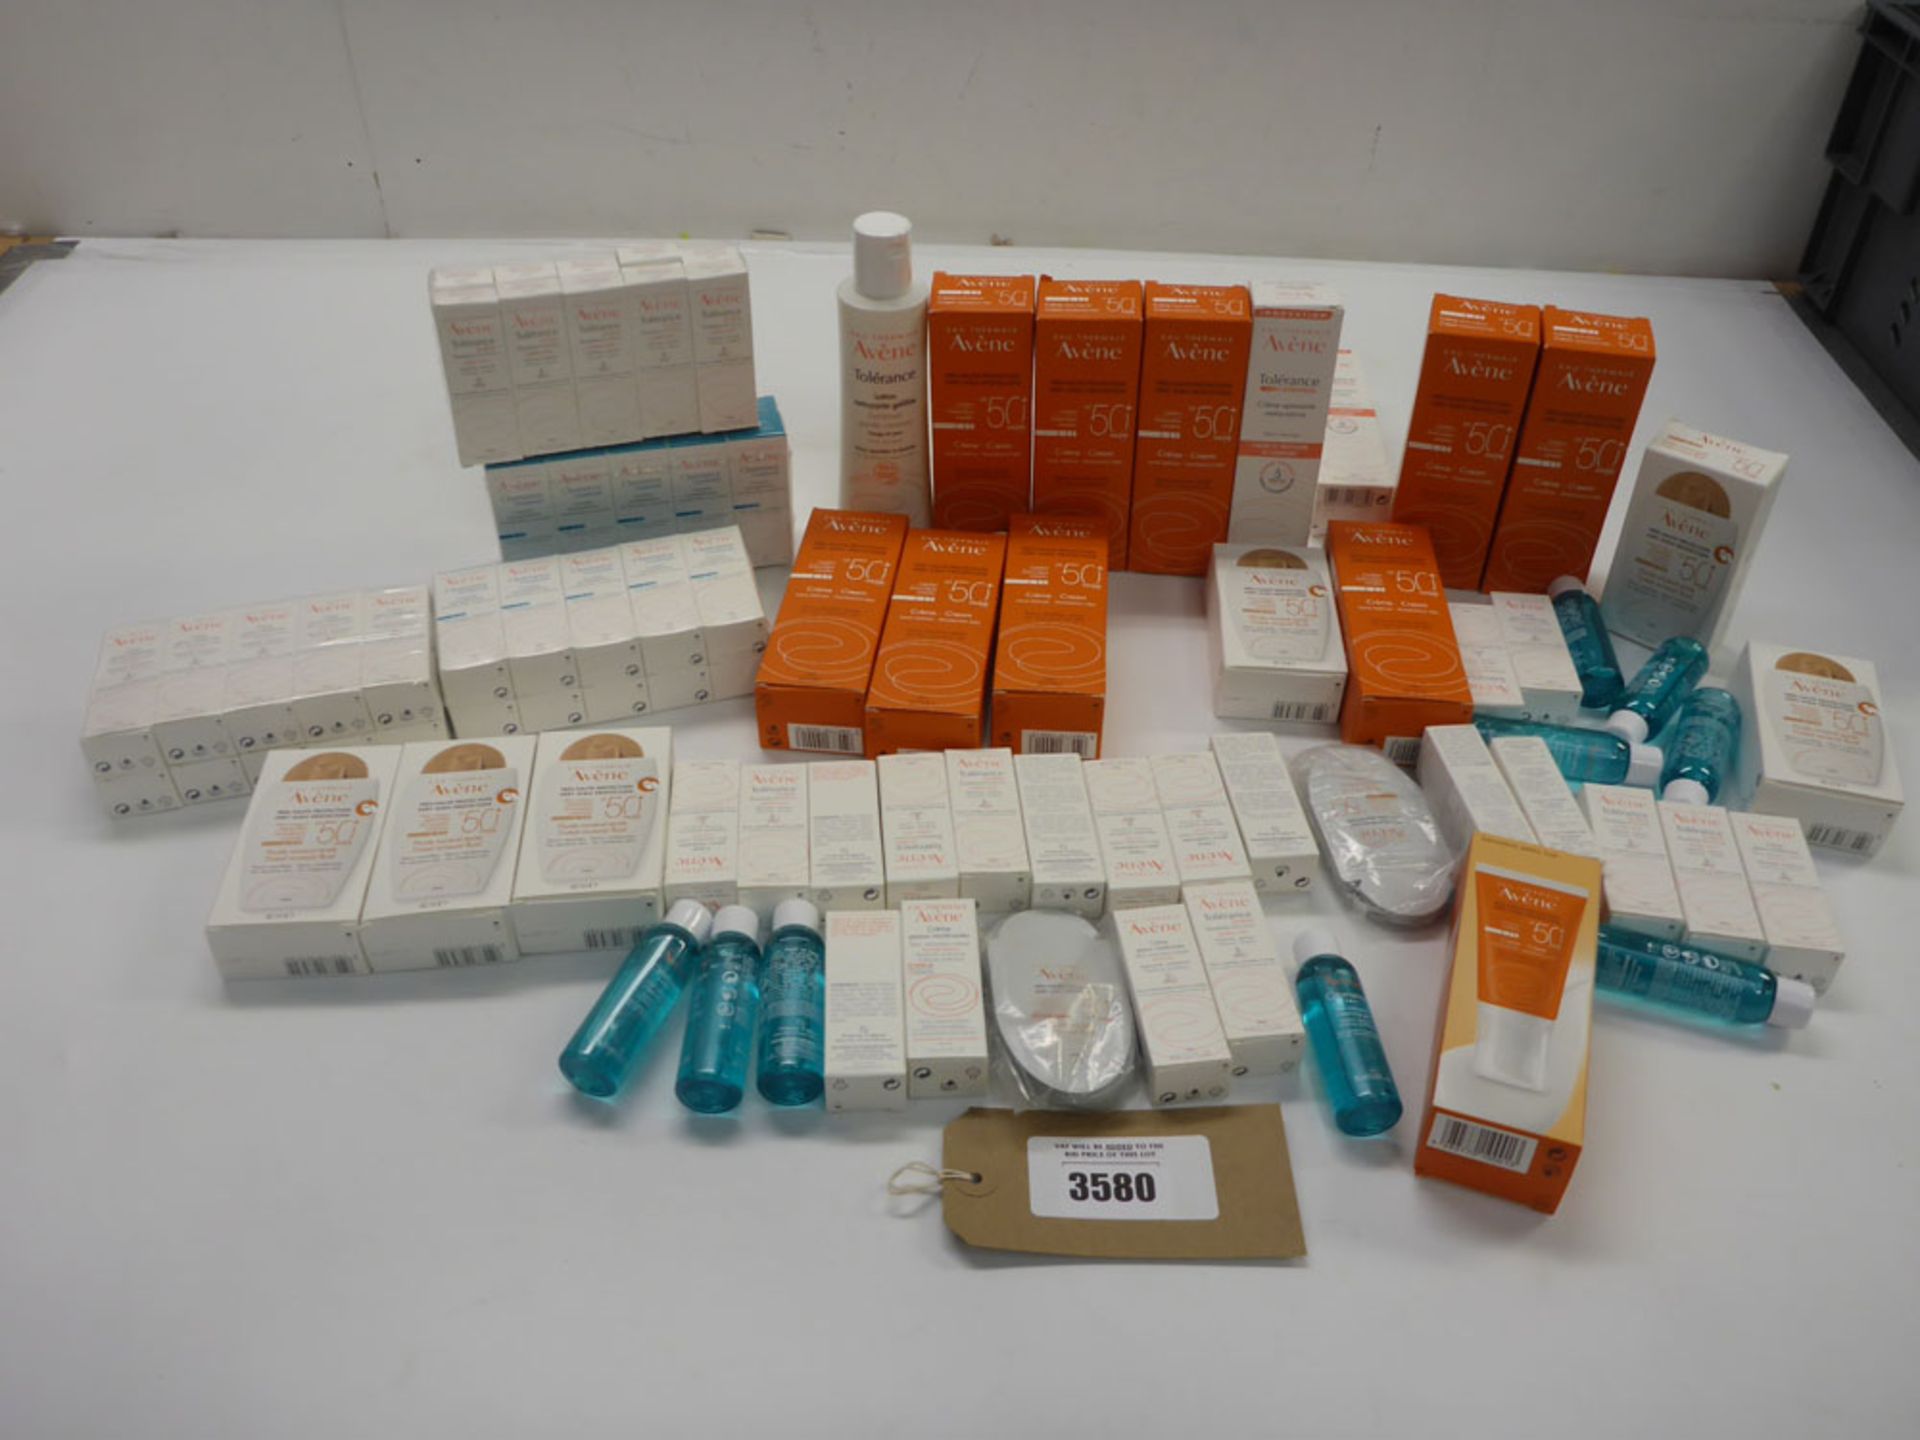 Selection of Eau Thermale Avene beauty products including Fragrance Free Cream, Lotions, cleansing